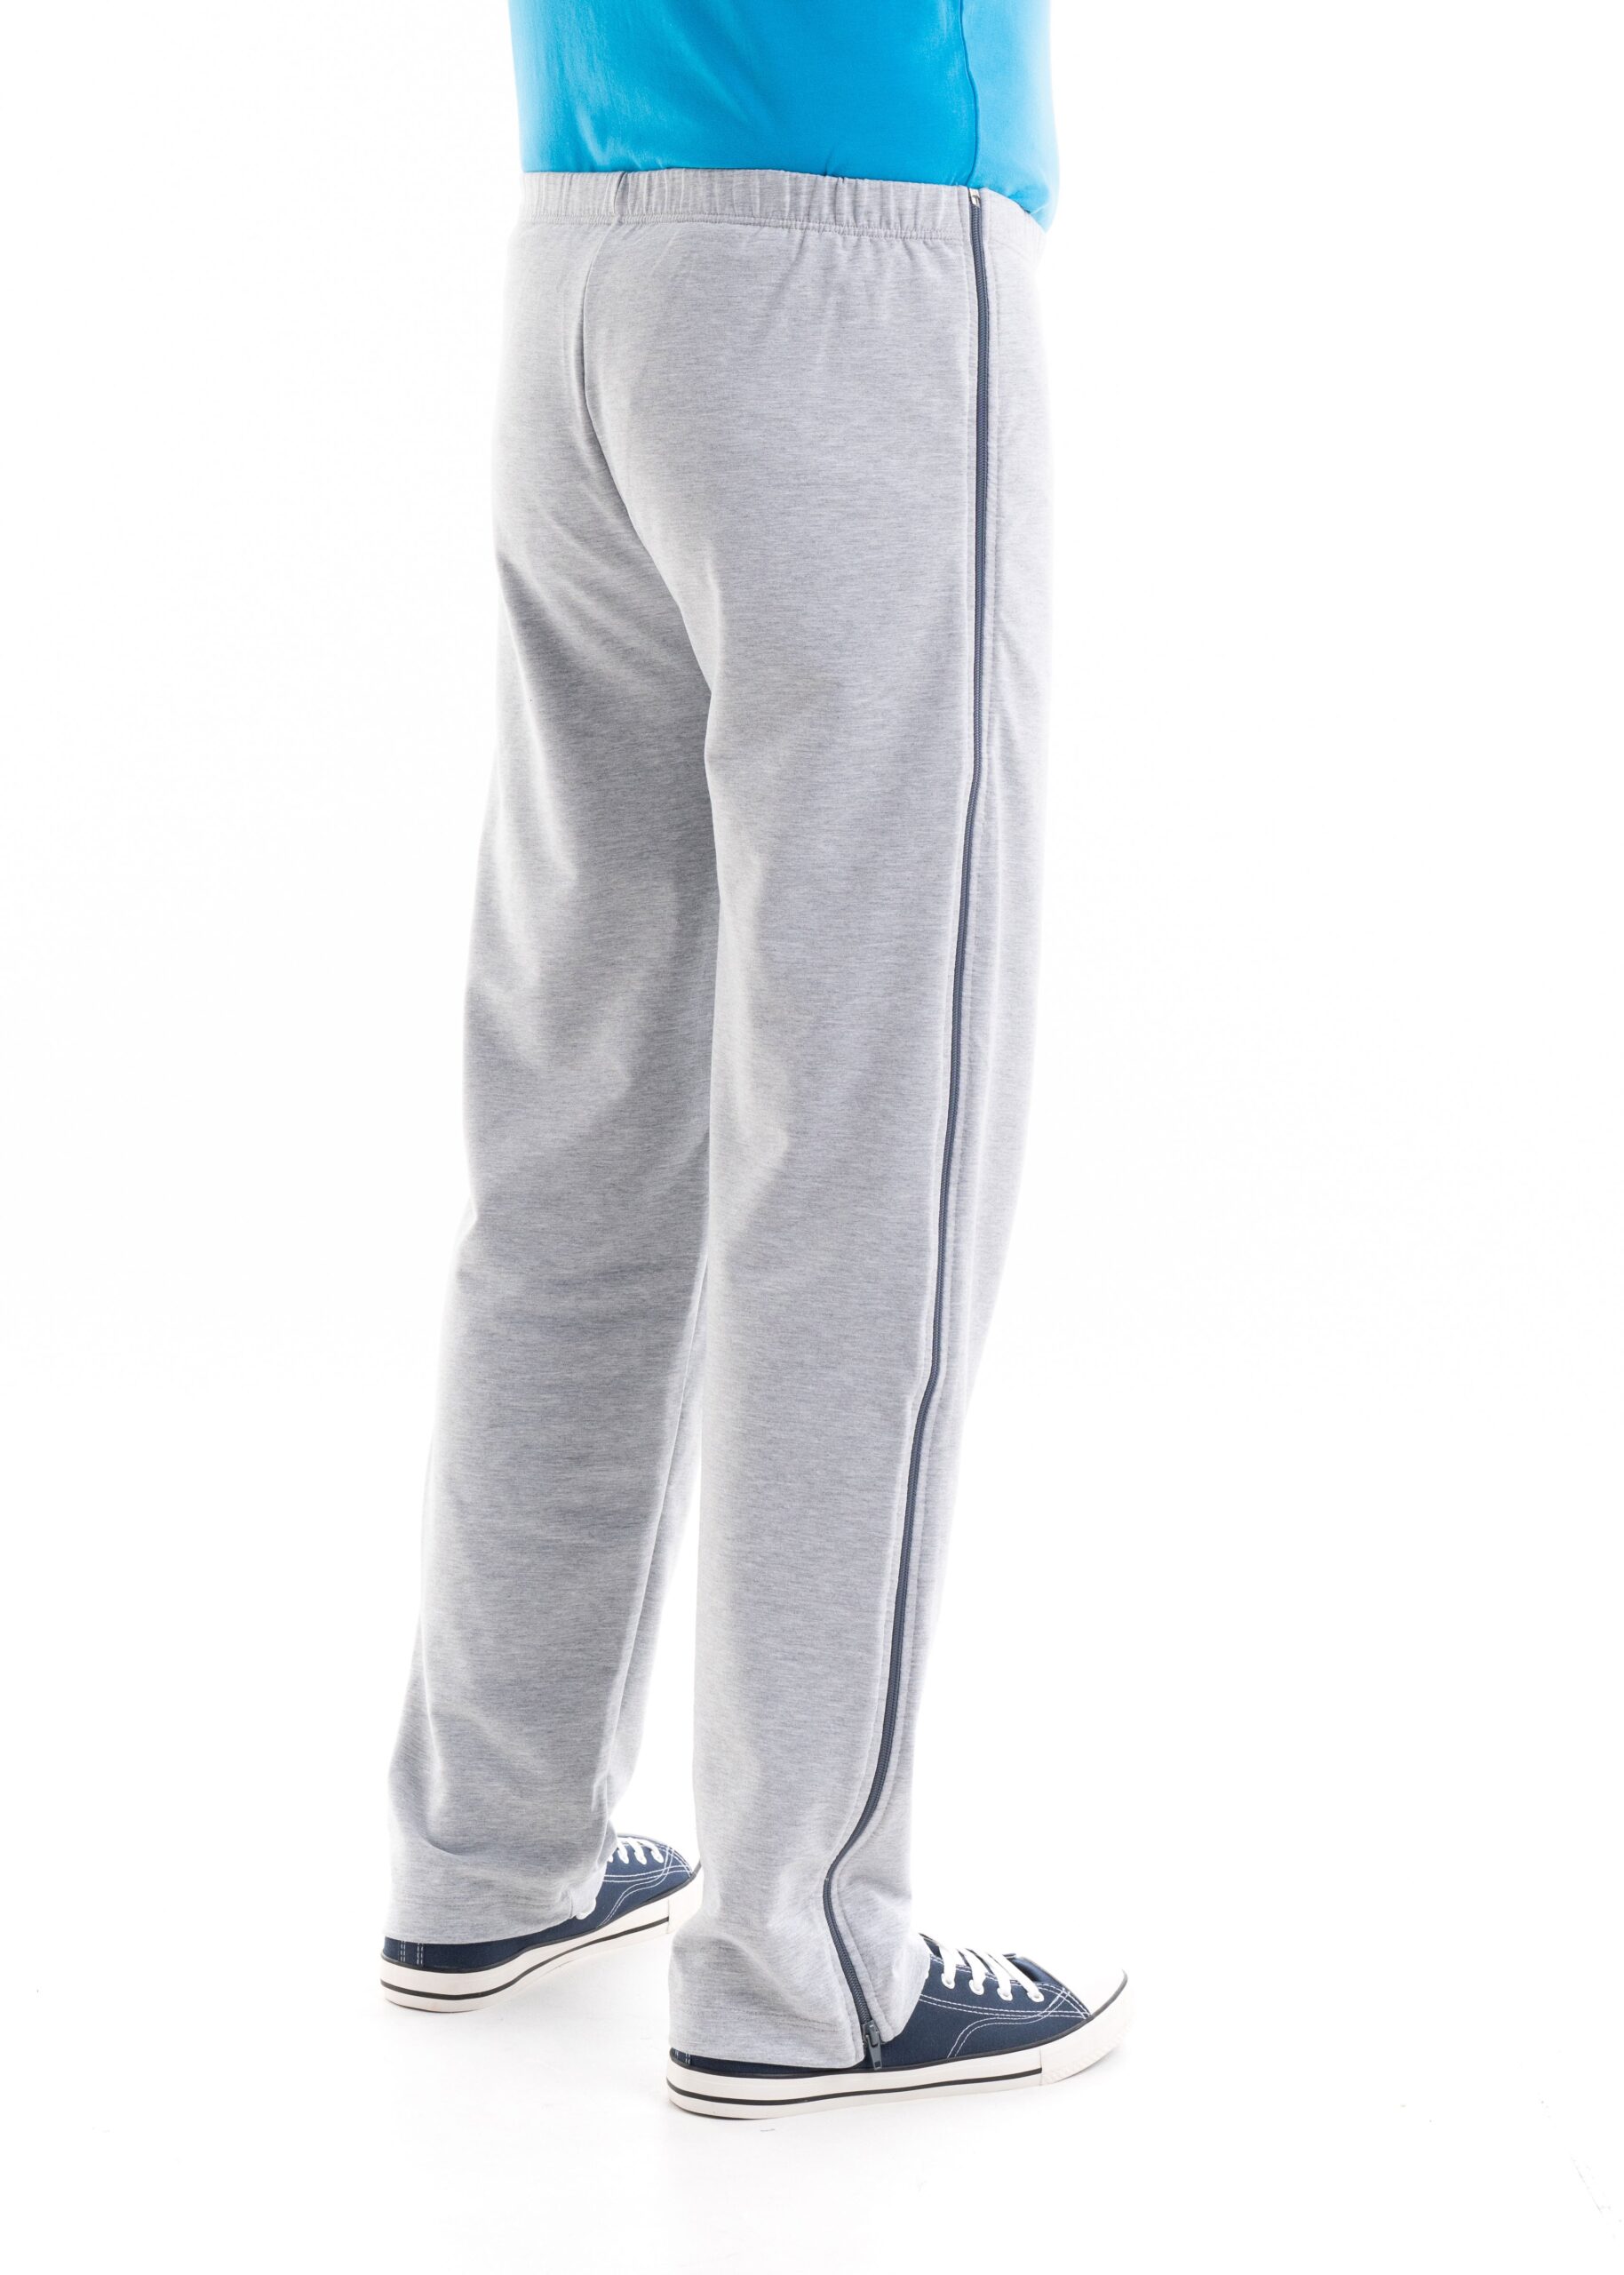 Men's Tracksuit Bottoms with full side zips